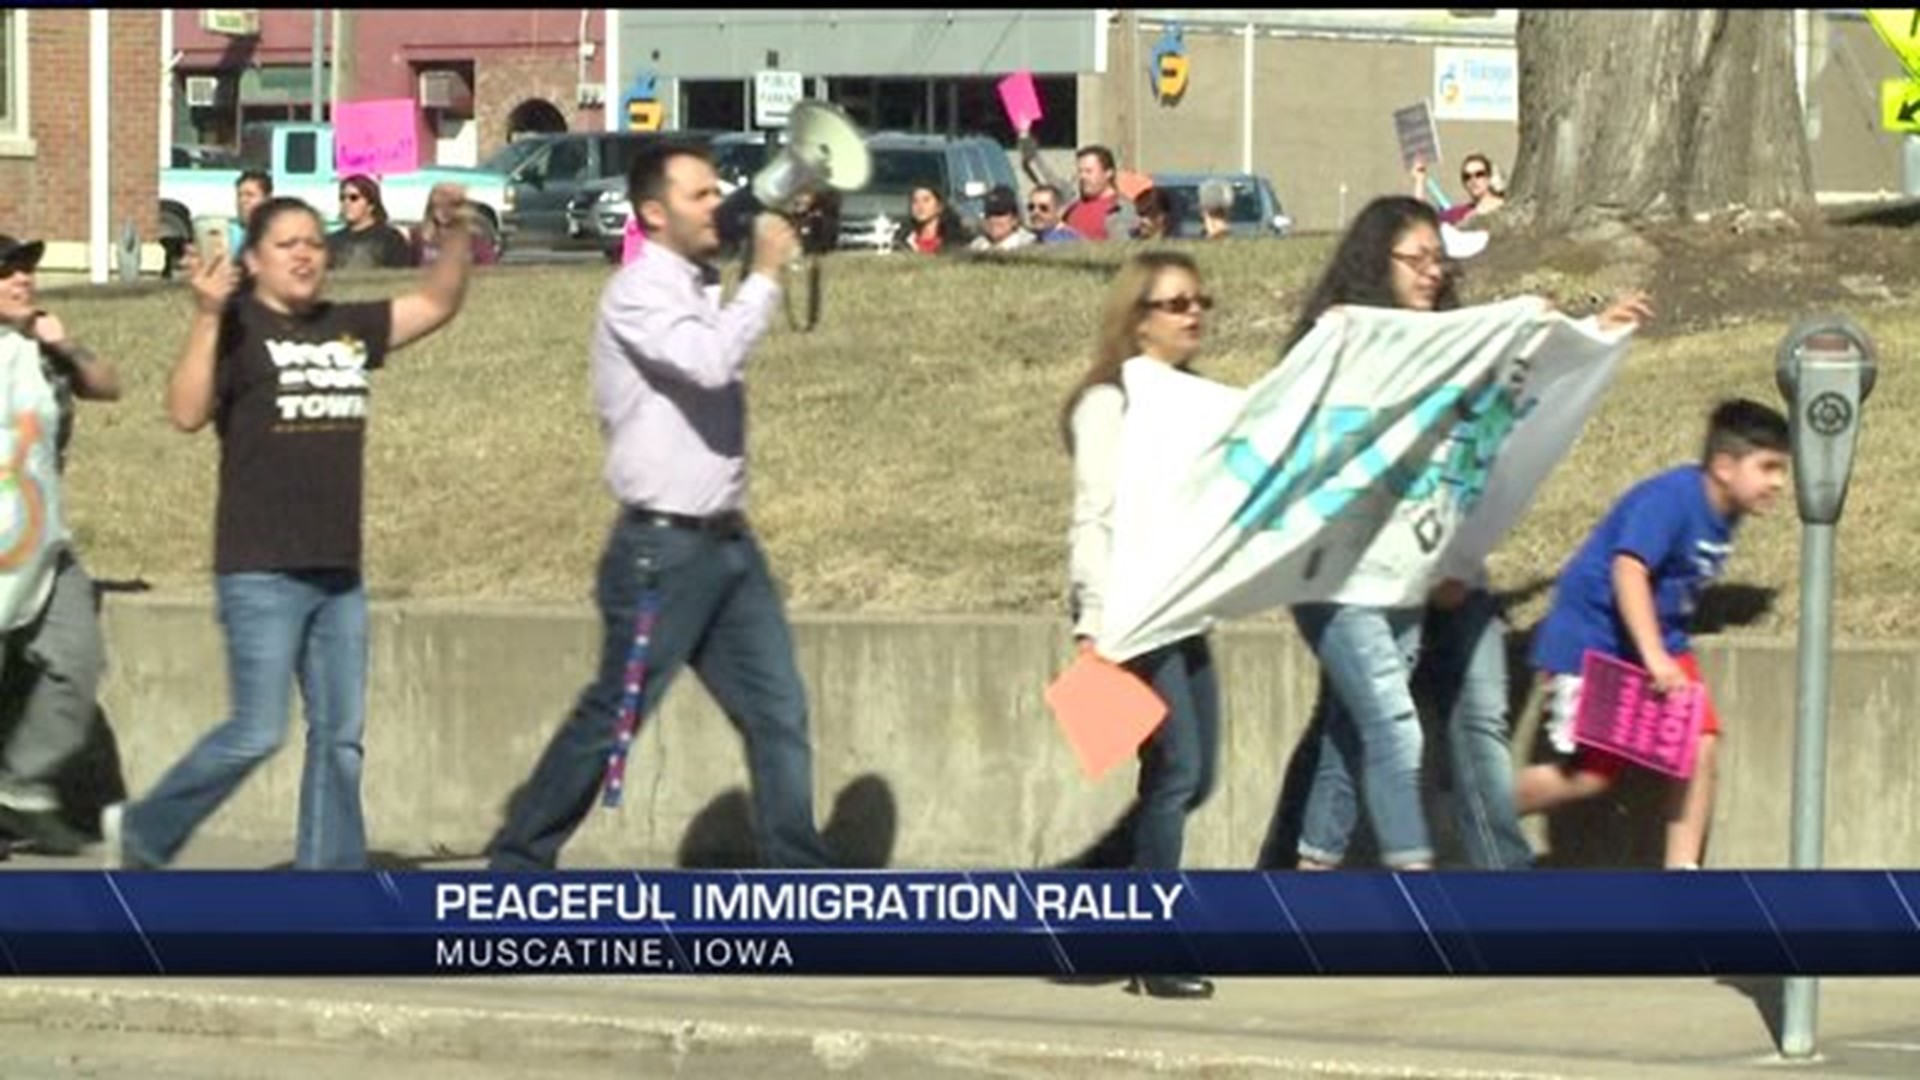 Dozens peacefully march and rally for immigrant neighbors in Muscatine